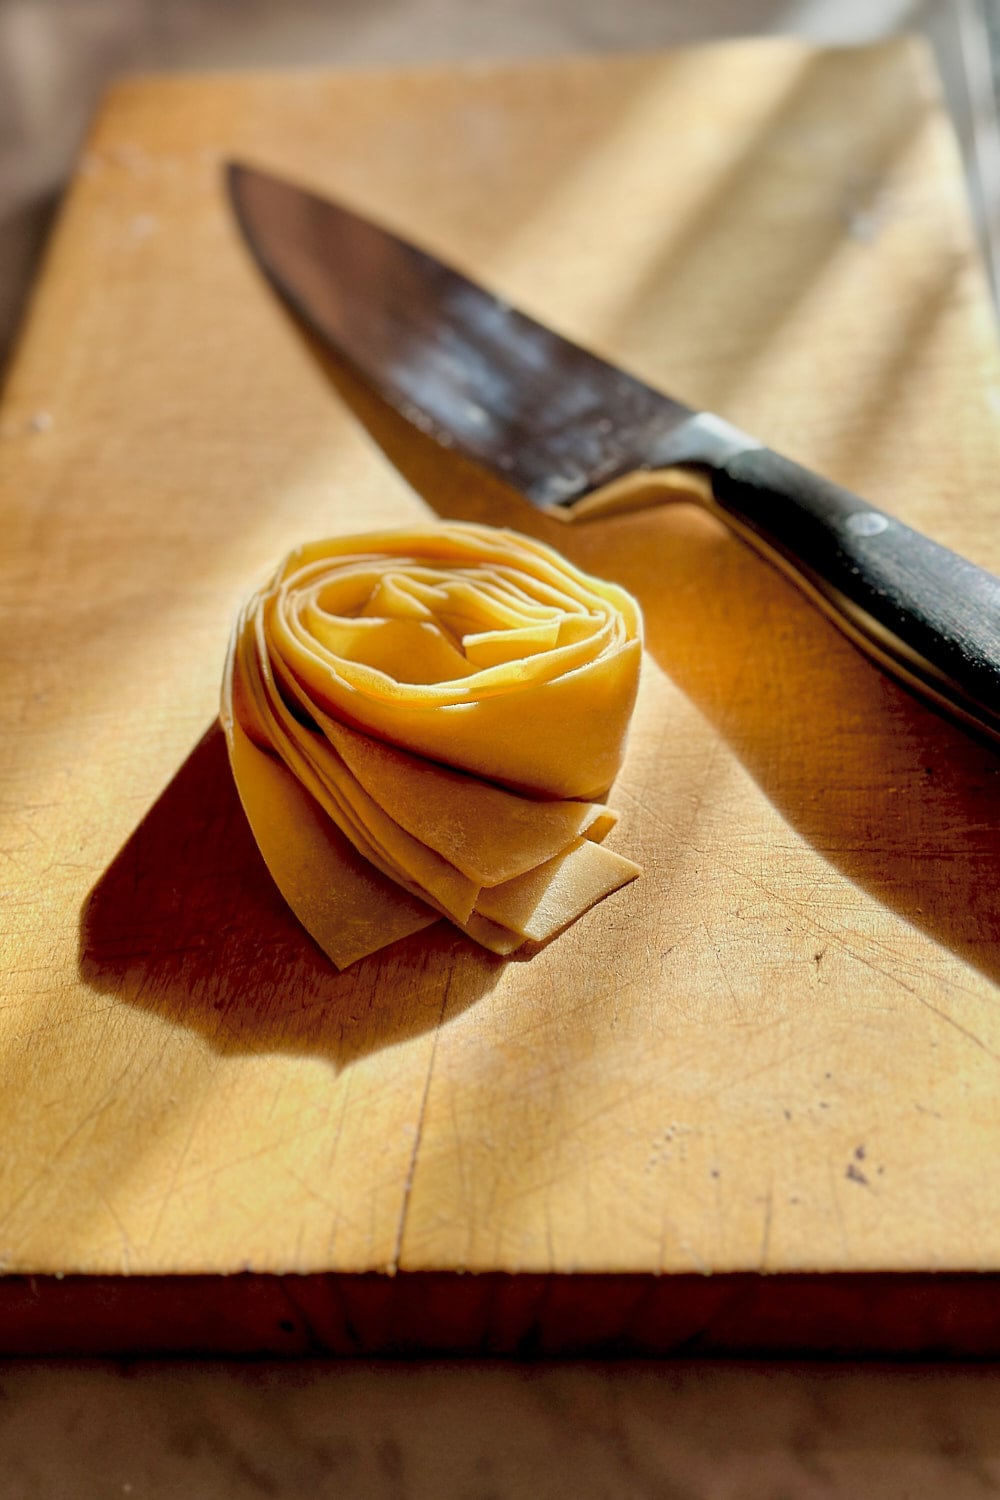 A pappardelle pasta nest next to a sharp knife on a wooden board.